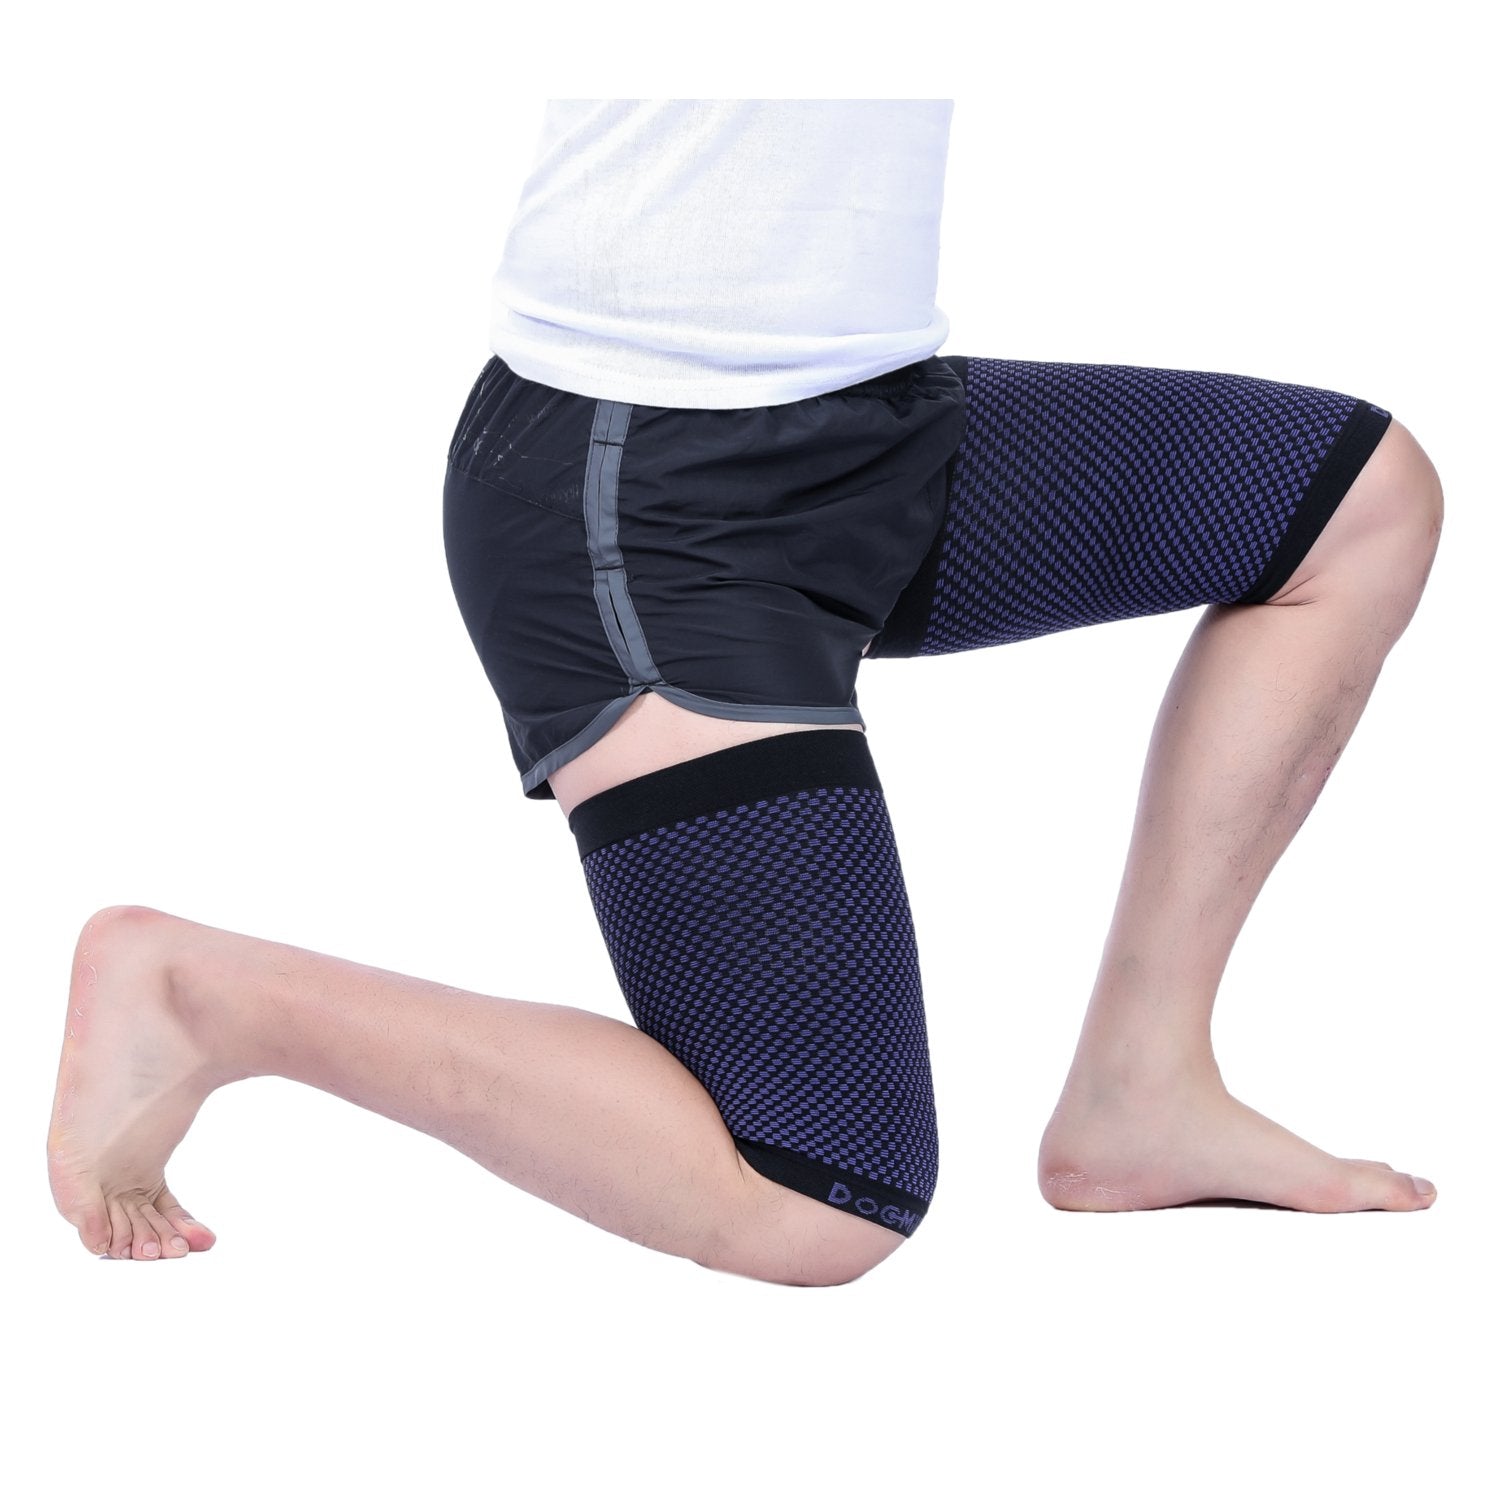 Thigh Compression Support Sleeve For Hamstring & Leg Recovery